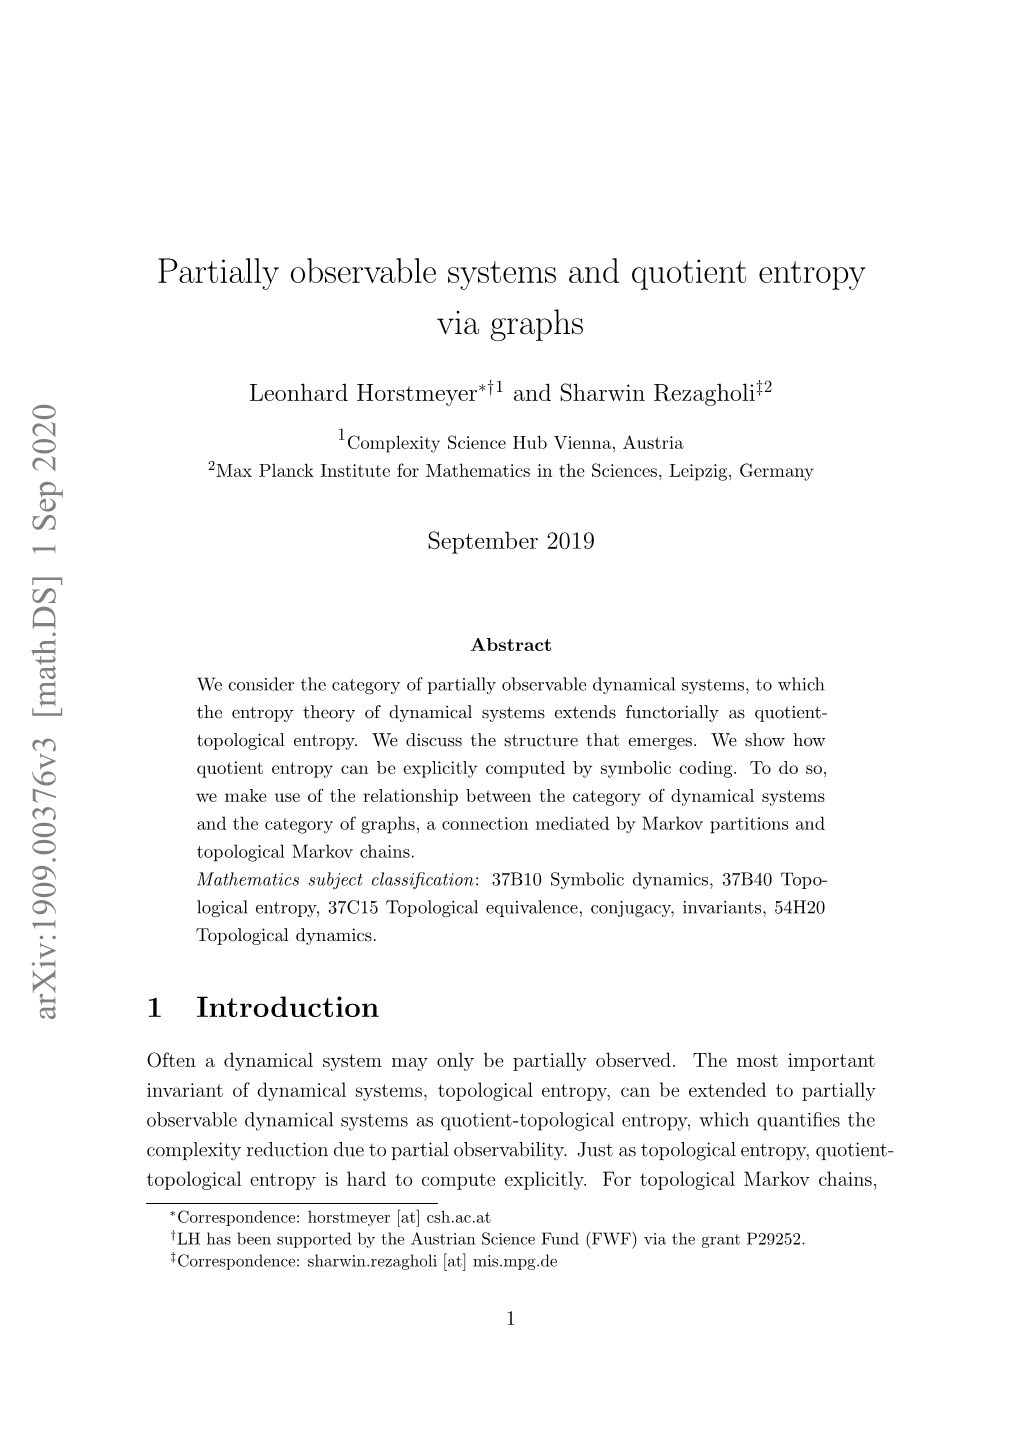 Partially Observable Systems and Quotient Entropy Via Graphs